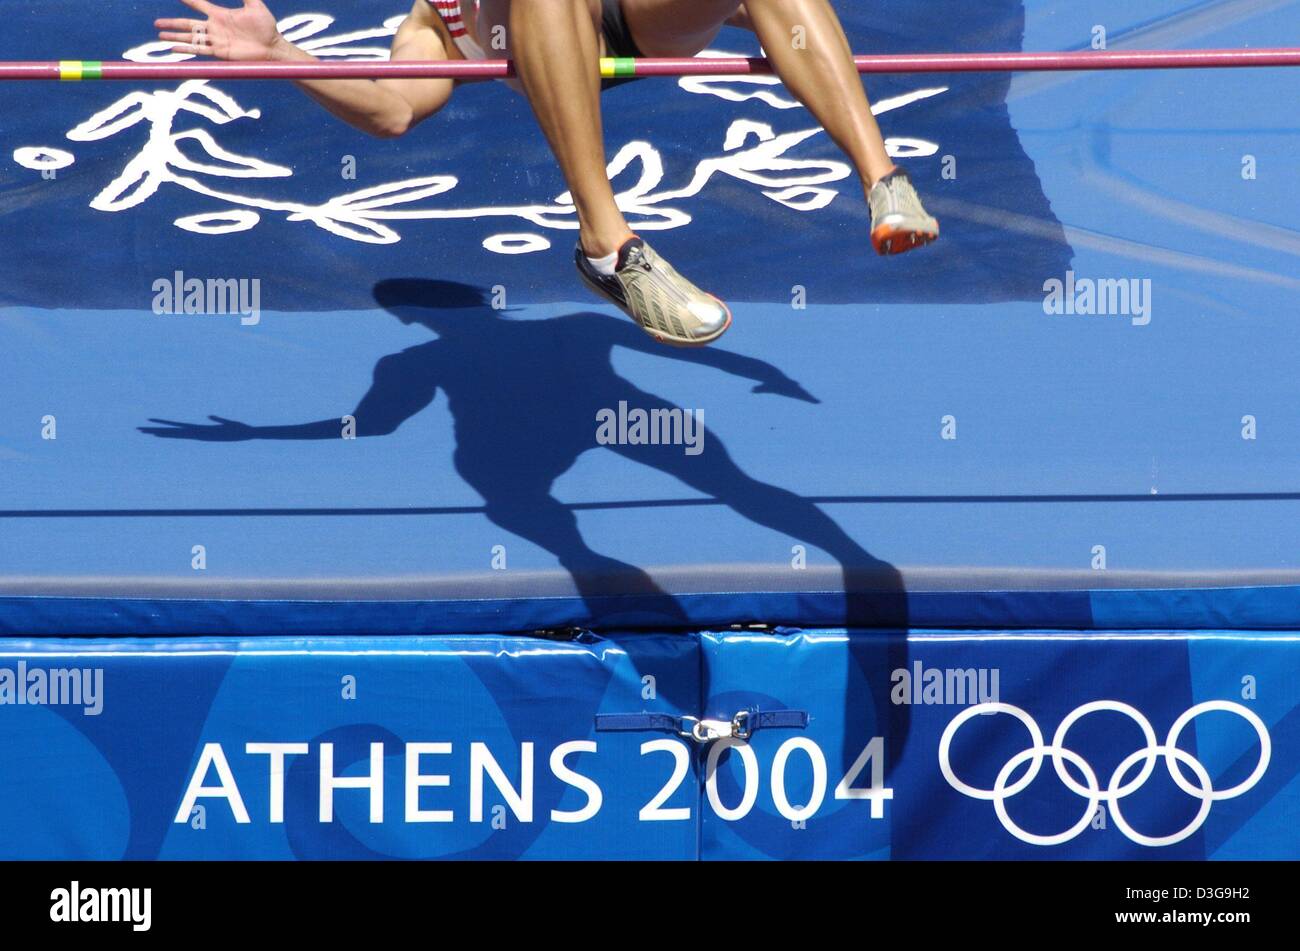 (dpa) - German Claudia Tonn succesfully jumps over the bar during the heptahlon high jump competition at the 2004 Olympic Games in Athens, Saturday 20 August 2004. Stock Photo